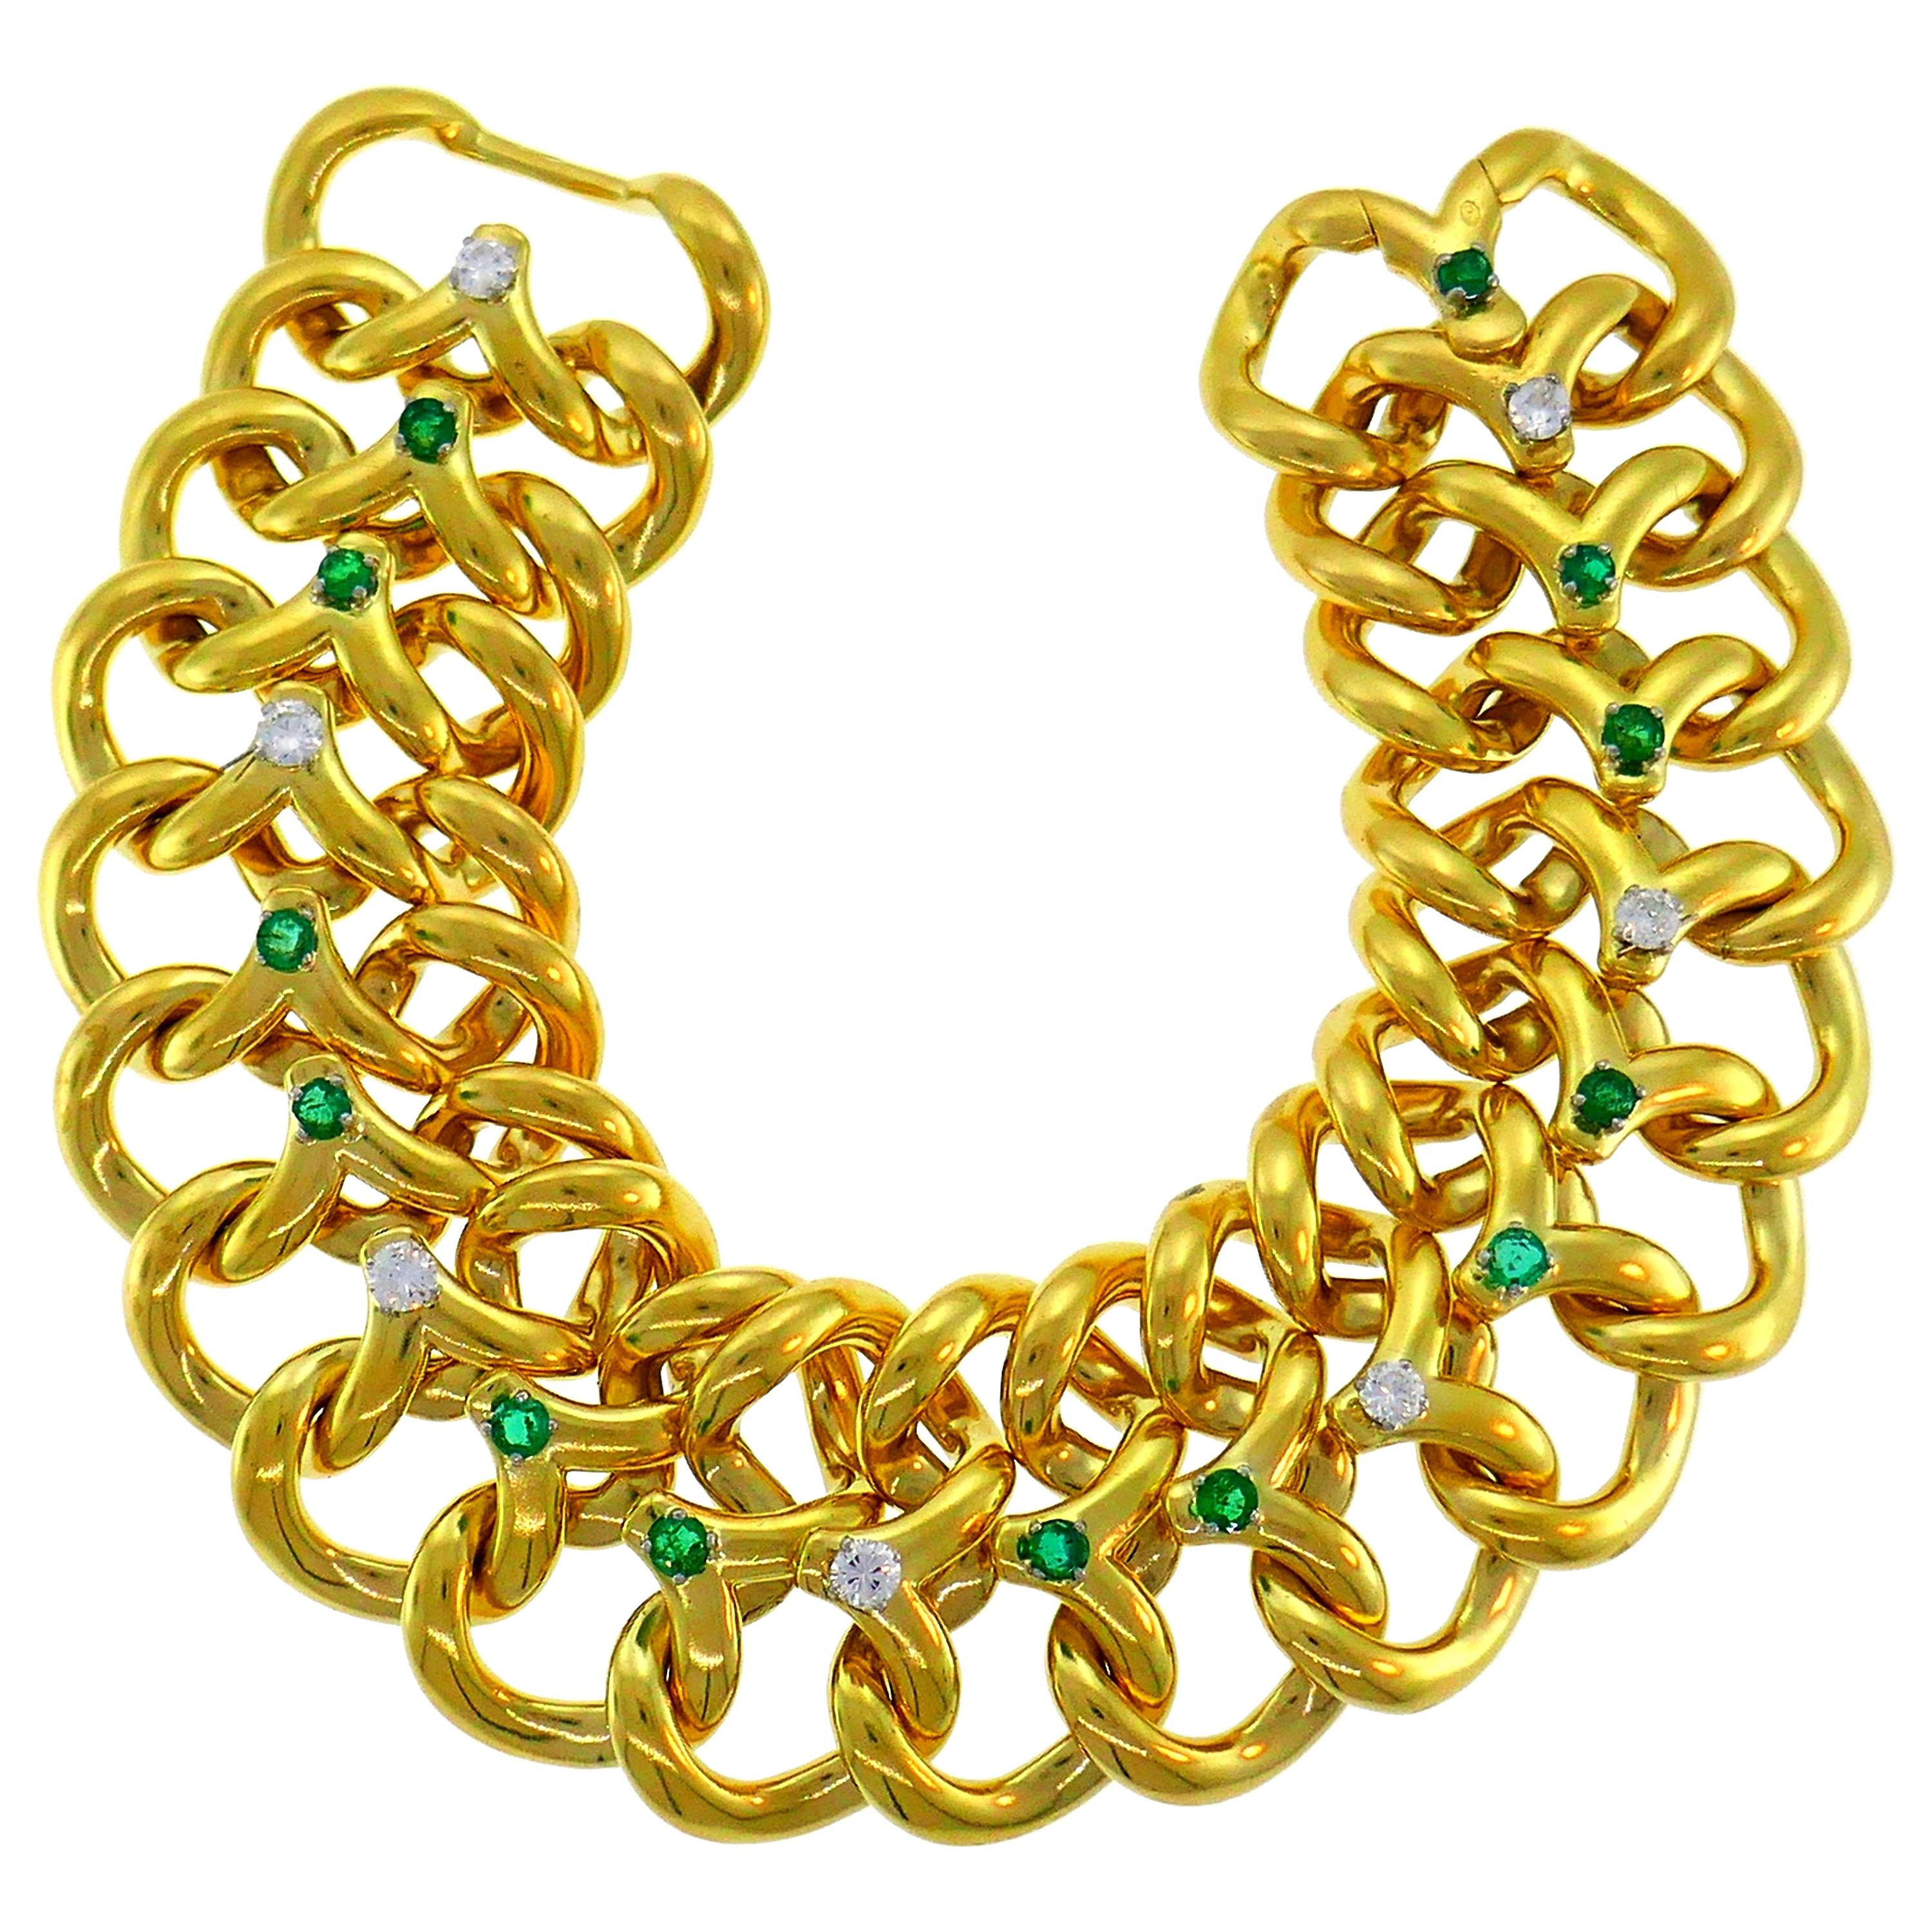 Van Cleef & Arpels Yellow Gold Bracelet with Diamond and Emerald